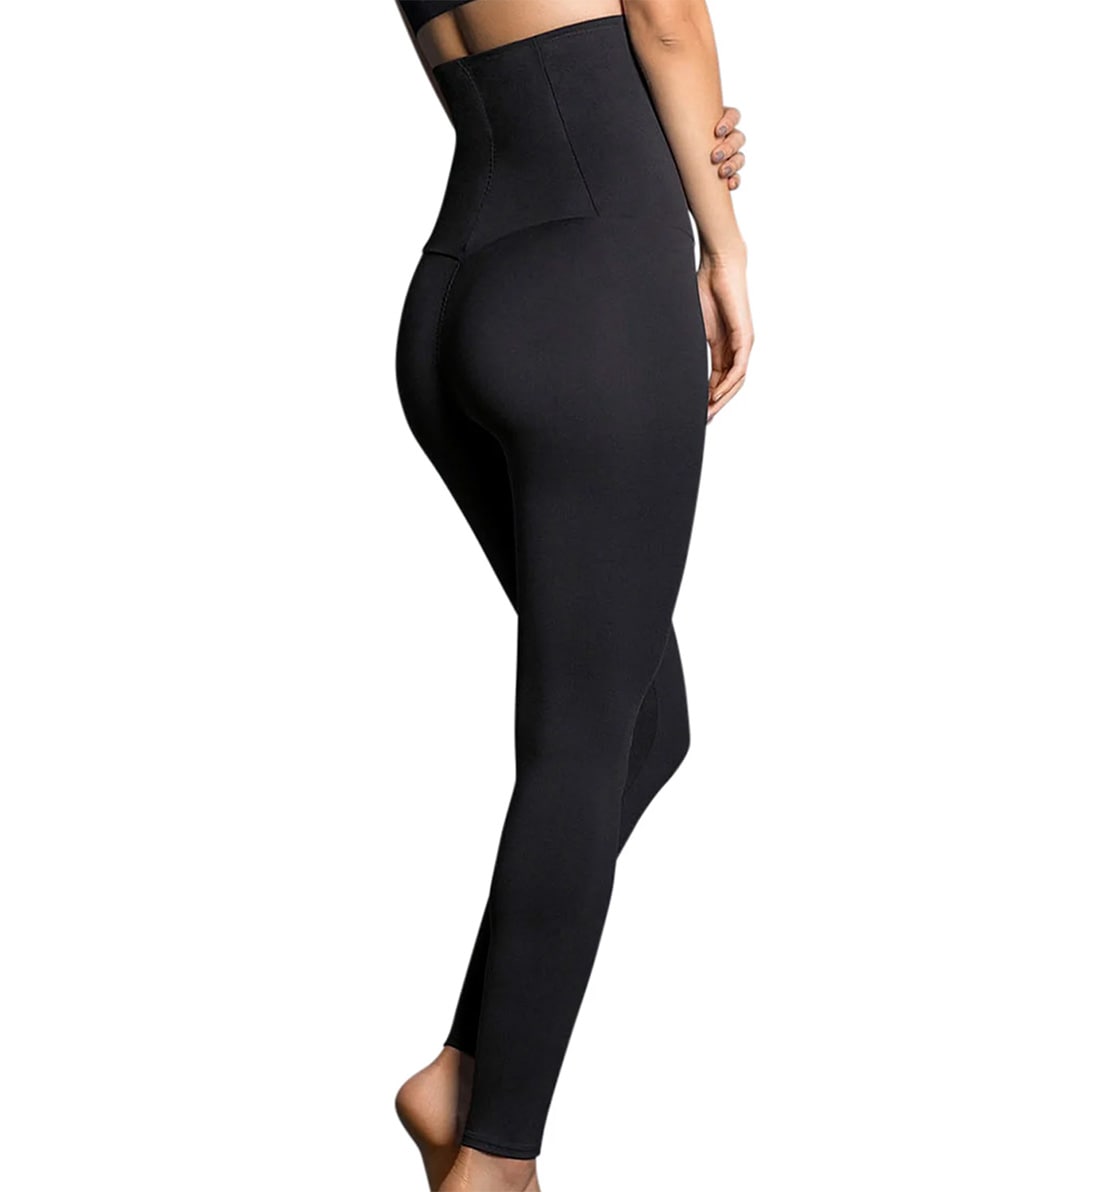 Leonisa Extra High-Waisted Firm Compression Legging (012901),Small,Black - Black,Small